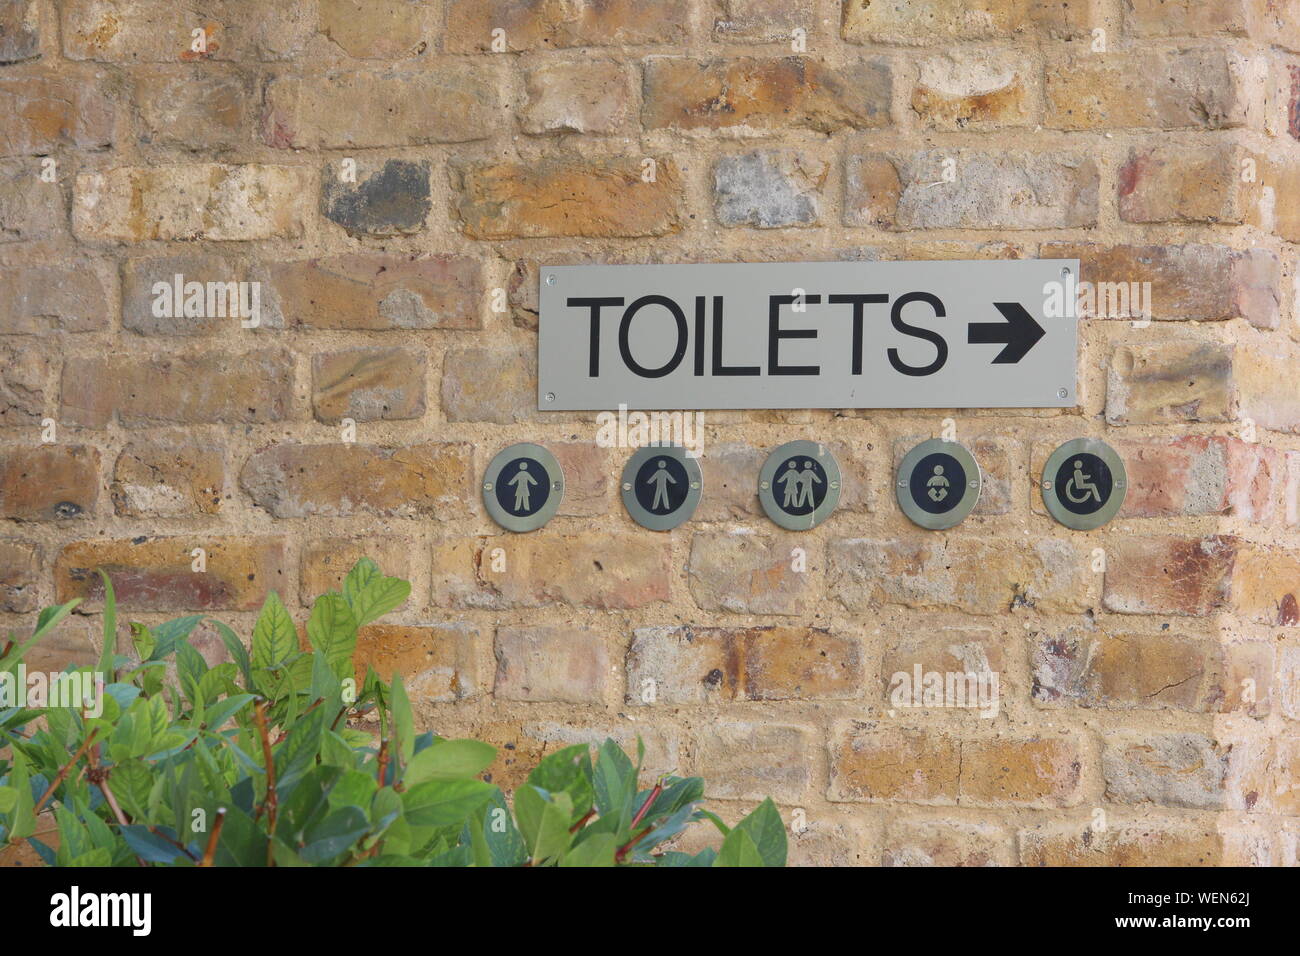 A photograph of a metal toilet sign, men's, women's, disabled, gender neutral, baby changing. Metal sign on a stone wall. Stock Photo